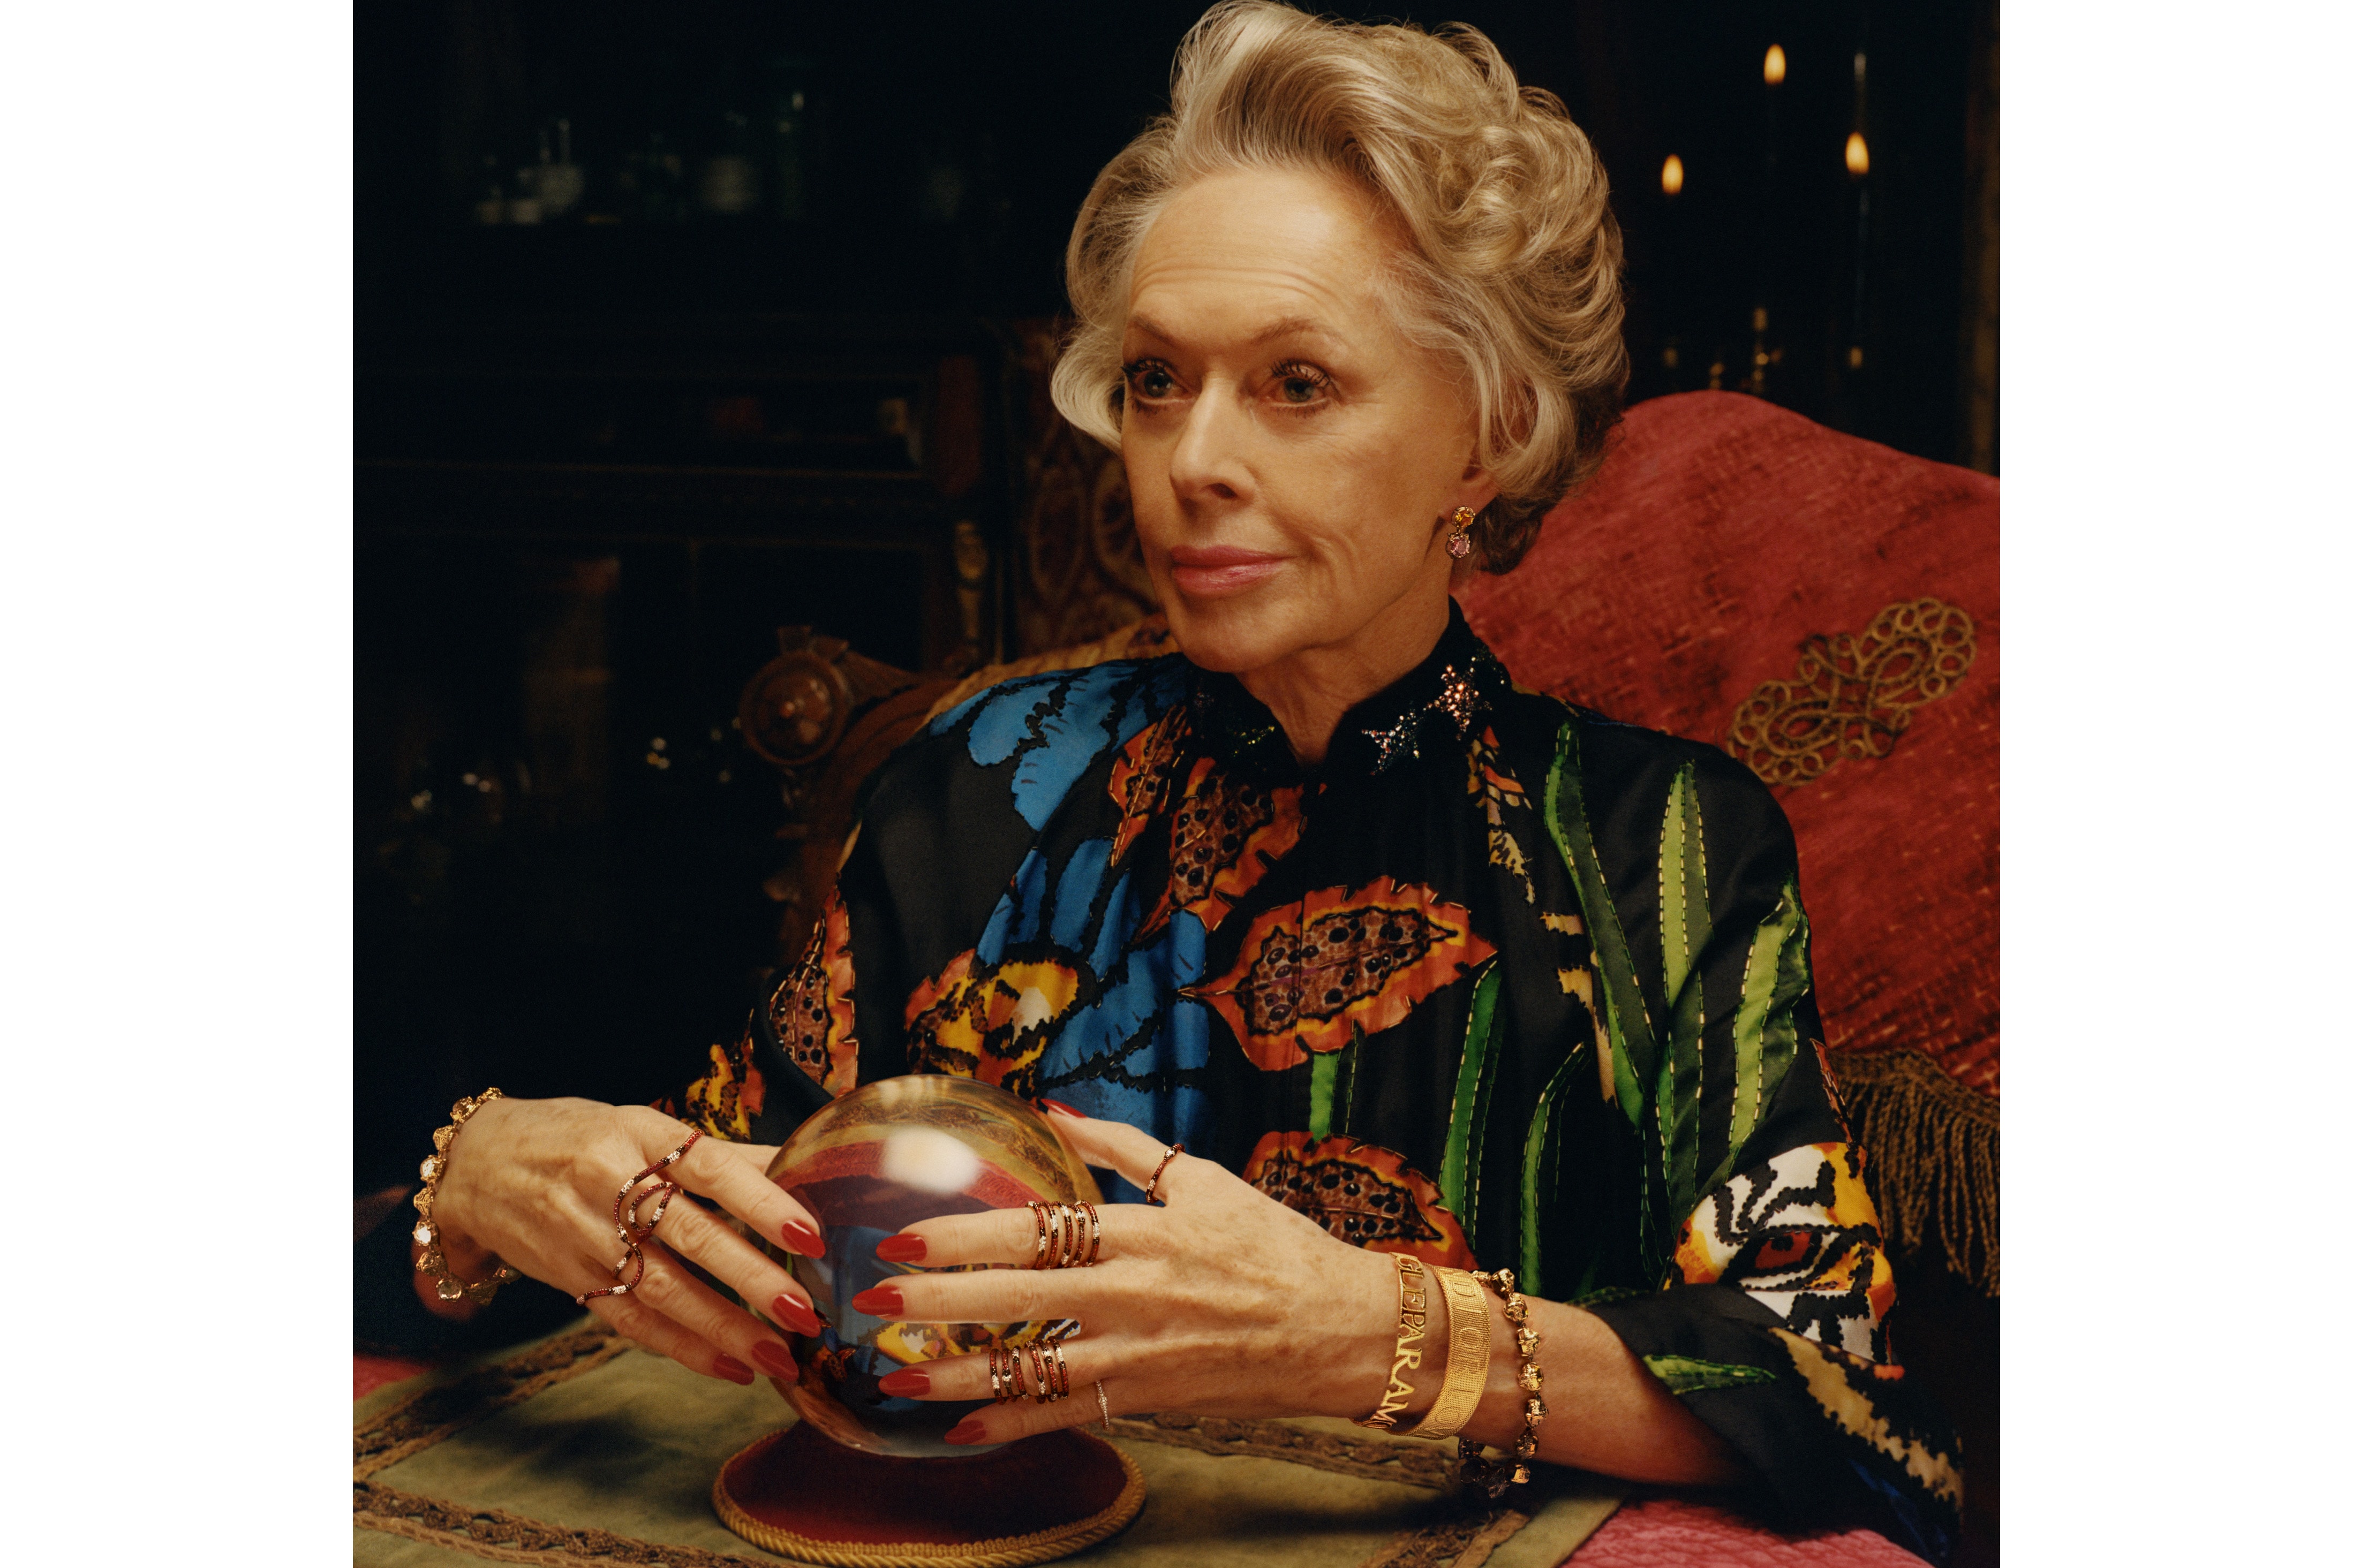 Gucci Taps Tippie Hedren for its latest Campaign Accessories Jewelry Watches Psychic